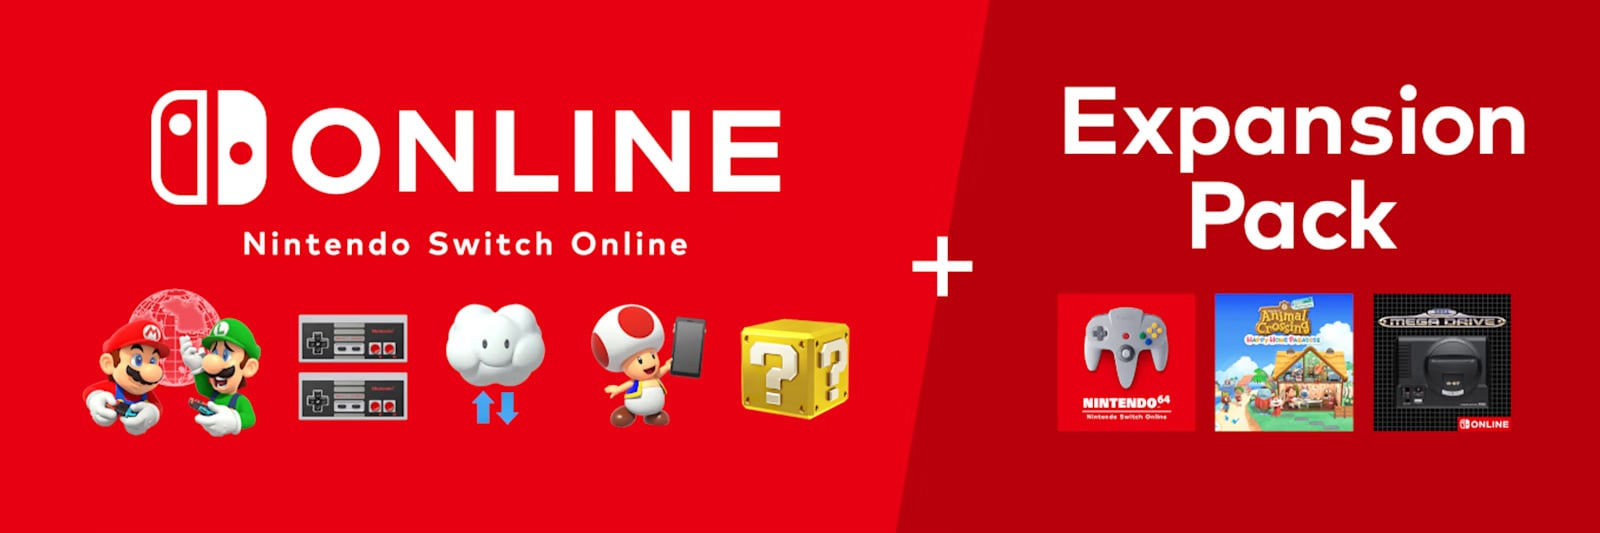 Benefits of Switch online and the expansion, including online play, NES online, cloud saves, a smartphone app and exclusive offers, plus N64 online, MegaDrive online and the Animal Crossing expansion pack.